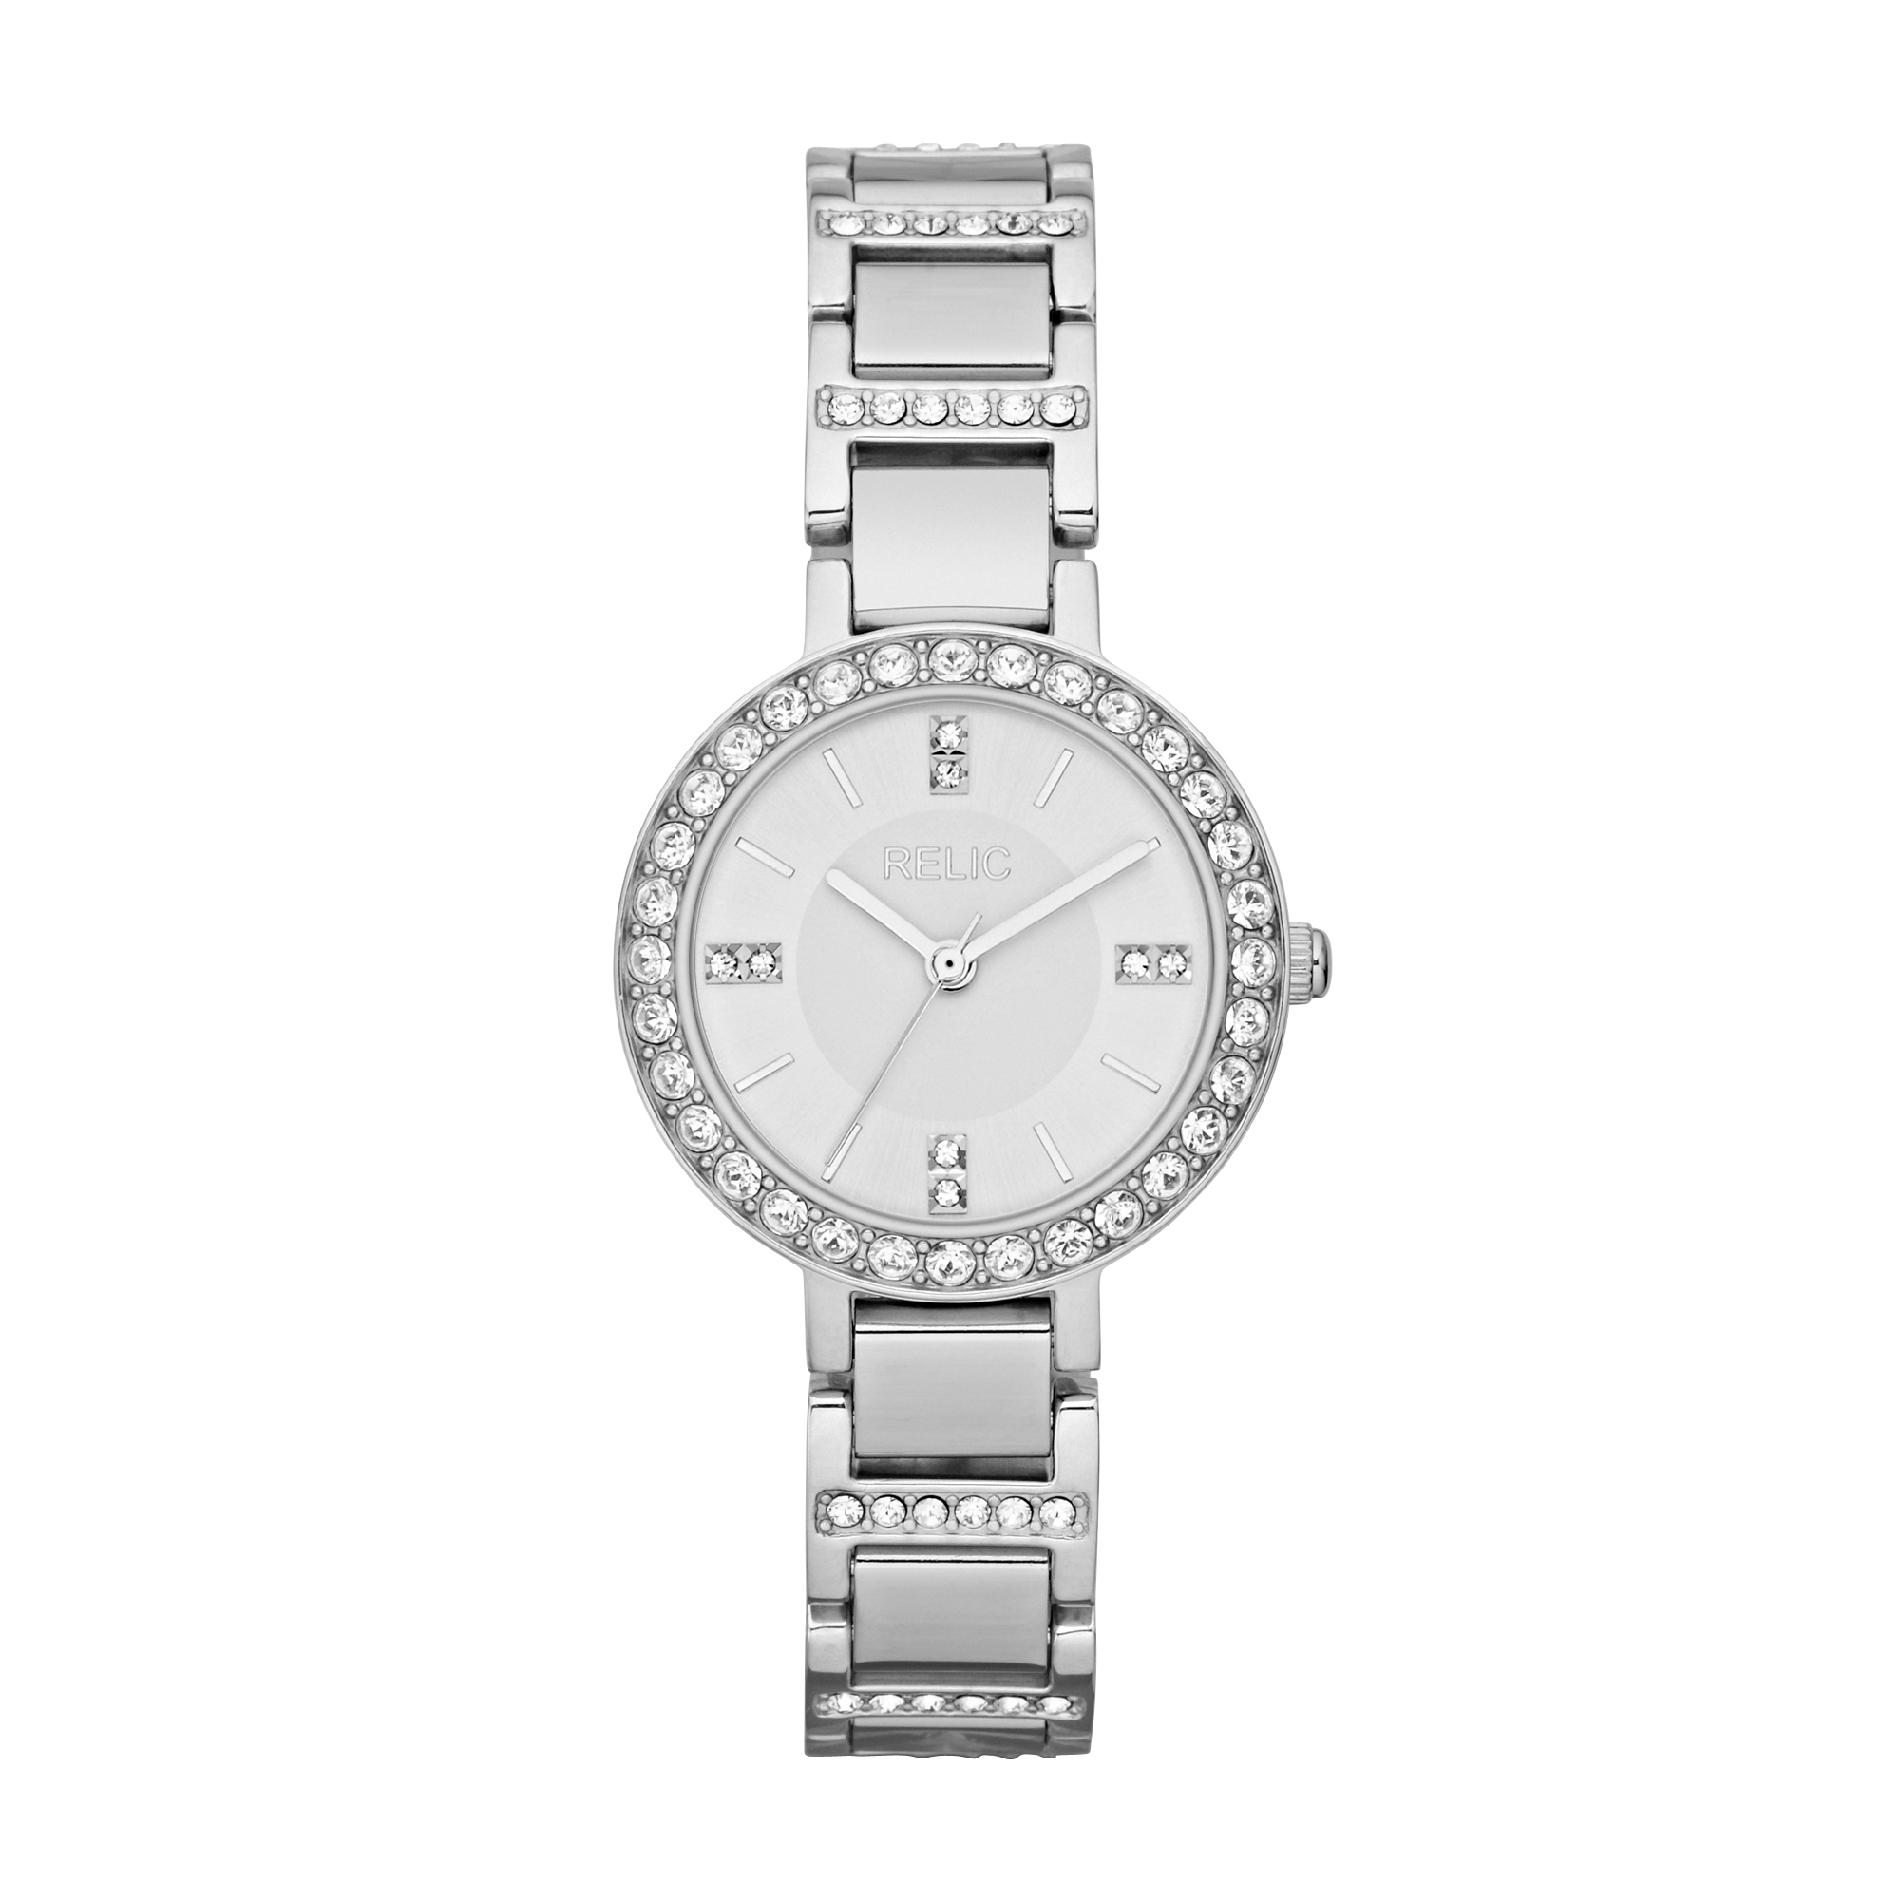 UPC 723765250076 product image for Relic Ladies' Silver Tone Bracelet Watch with Round Dial, Crystal Accents and St | upcitemdb.com